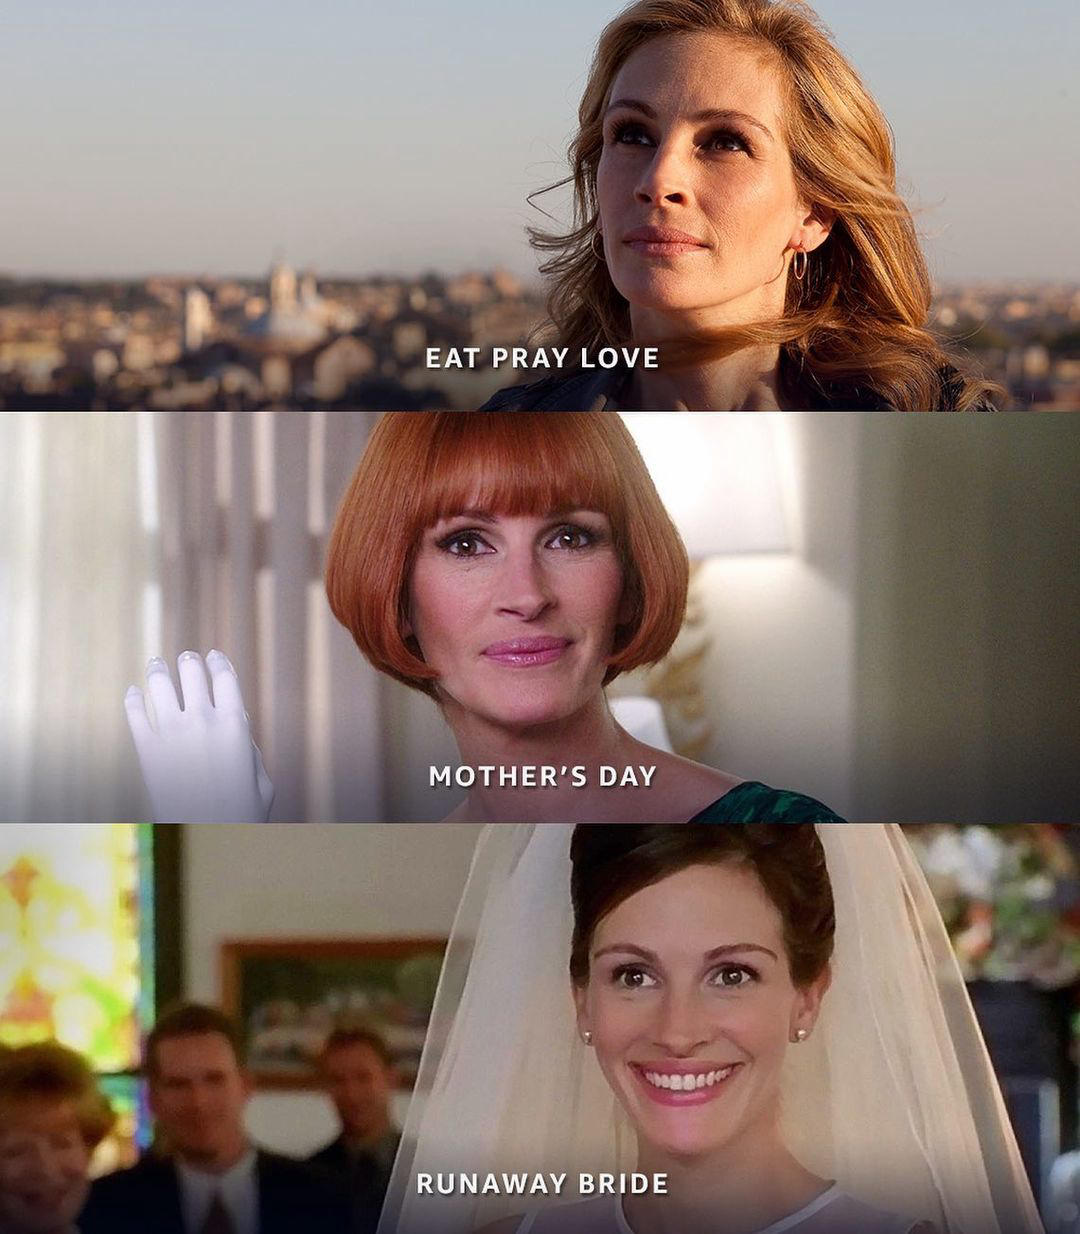 image  1 Prime Video - Pick one Julia Roberts character to eat with, one to pray with, and one to love